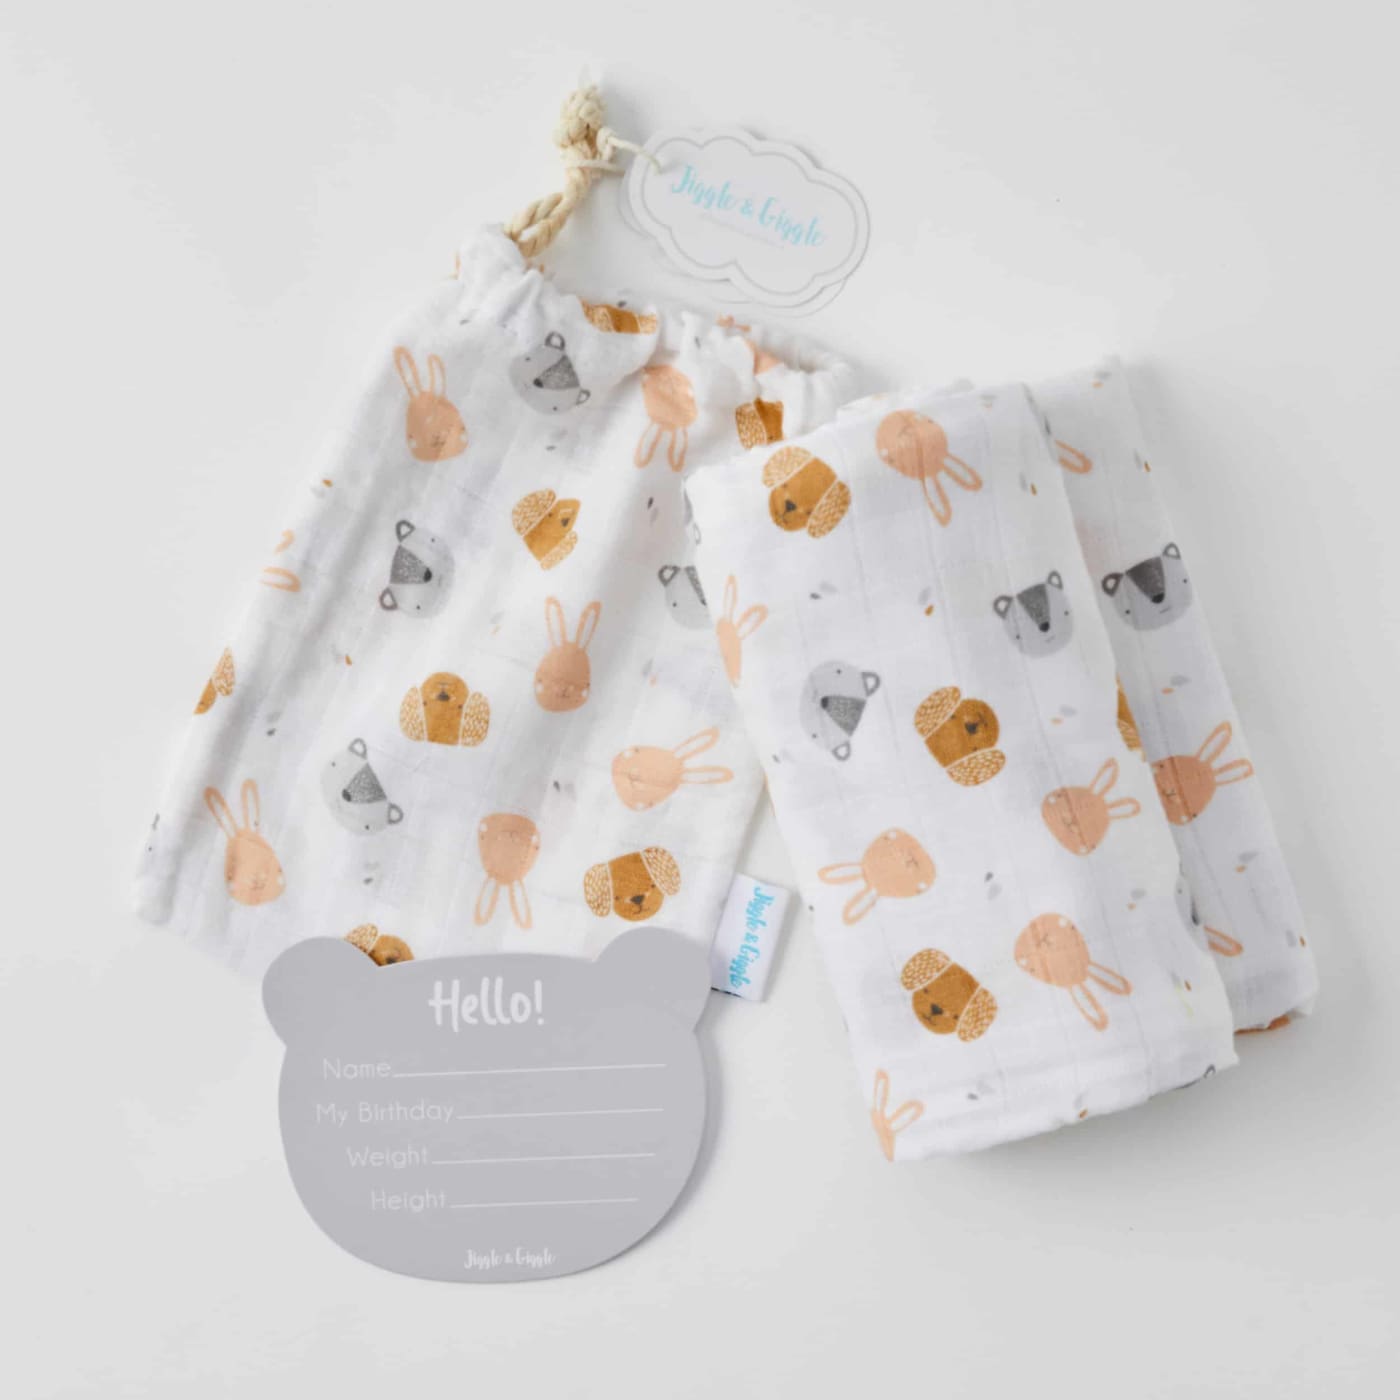 Jiggle & Giggle Cotton Muslin Blanket and Baby Milestone Photo Cards Set - Animal Faces - Animal Faces - NURSERY & BEDTIME - SWADDLES/WRAPS